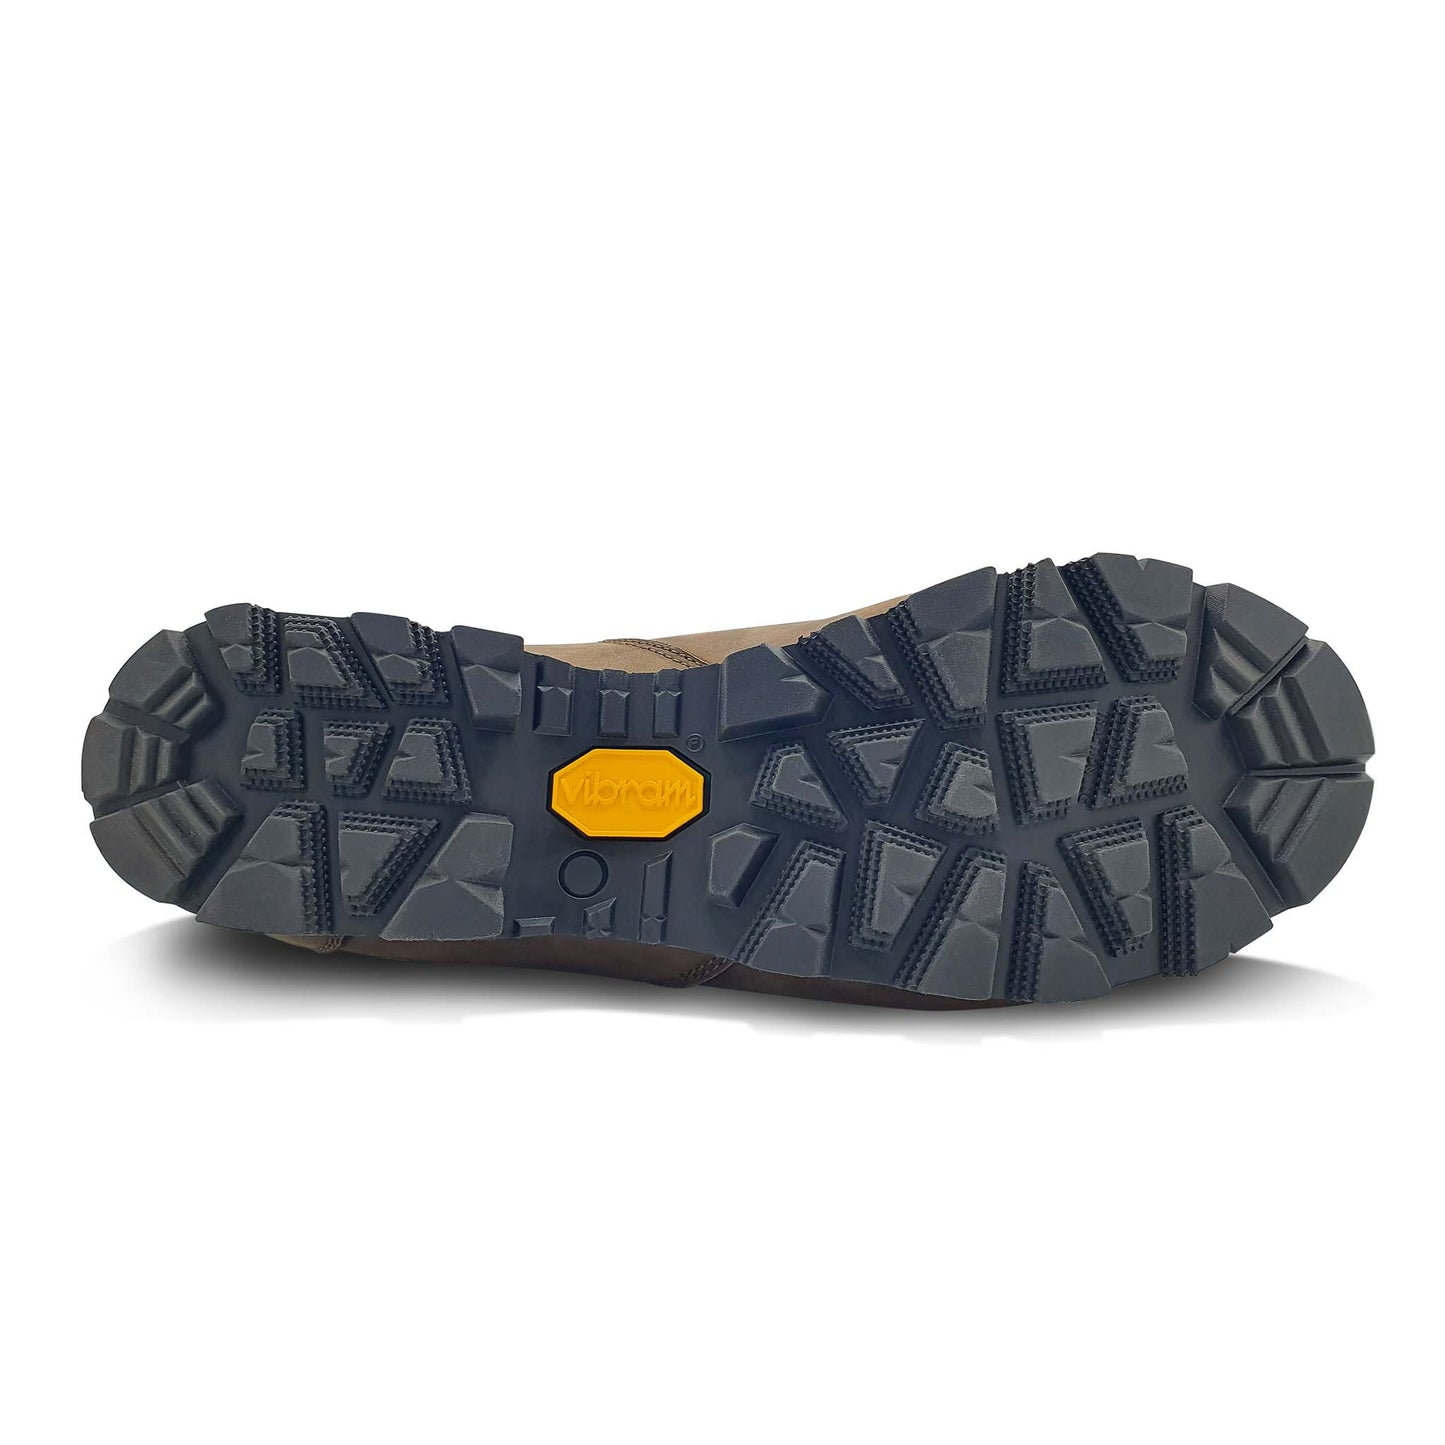 ANATOM Q1 Braemar Walking Shoe with Vibram outsole - PRE-ORDERS FOR SPRING NOW CLOSED. NEXT AVAILABLE DELIVERY AUTUMN 24